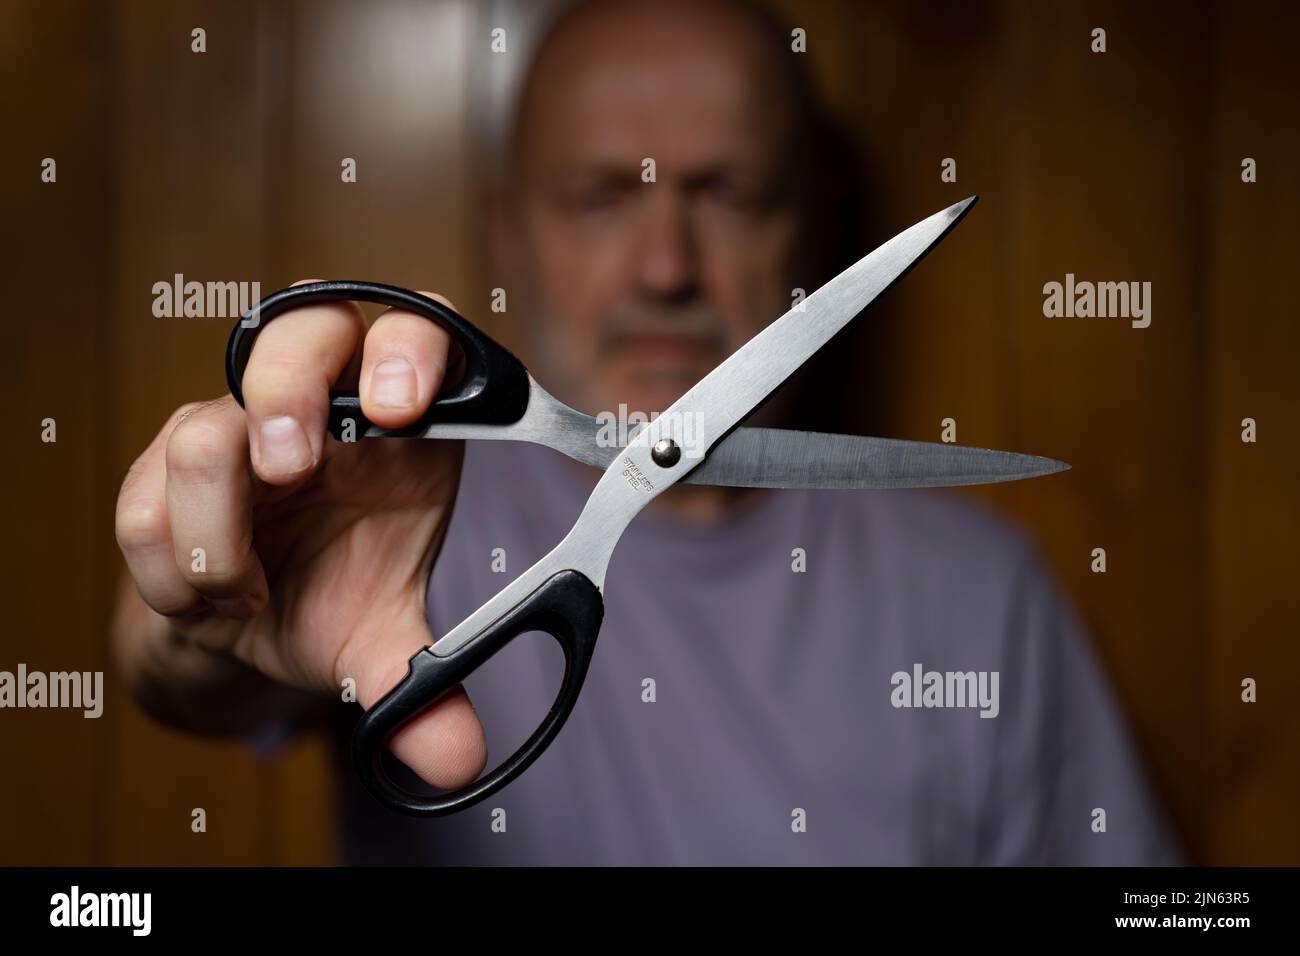 a man while making the gesture of cutting with scissors Stock Photo